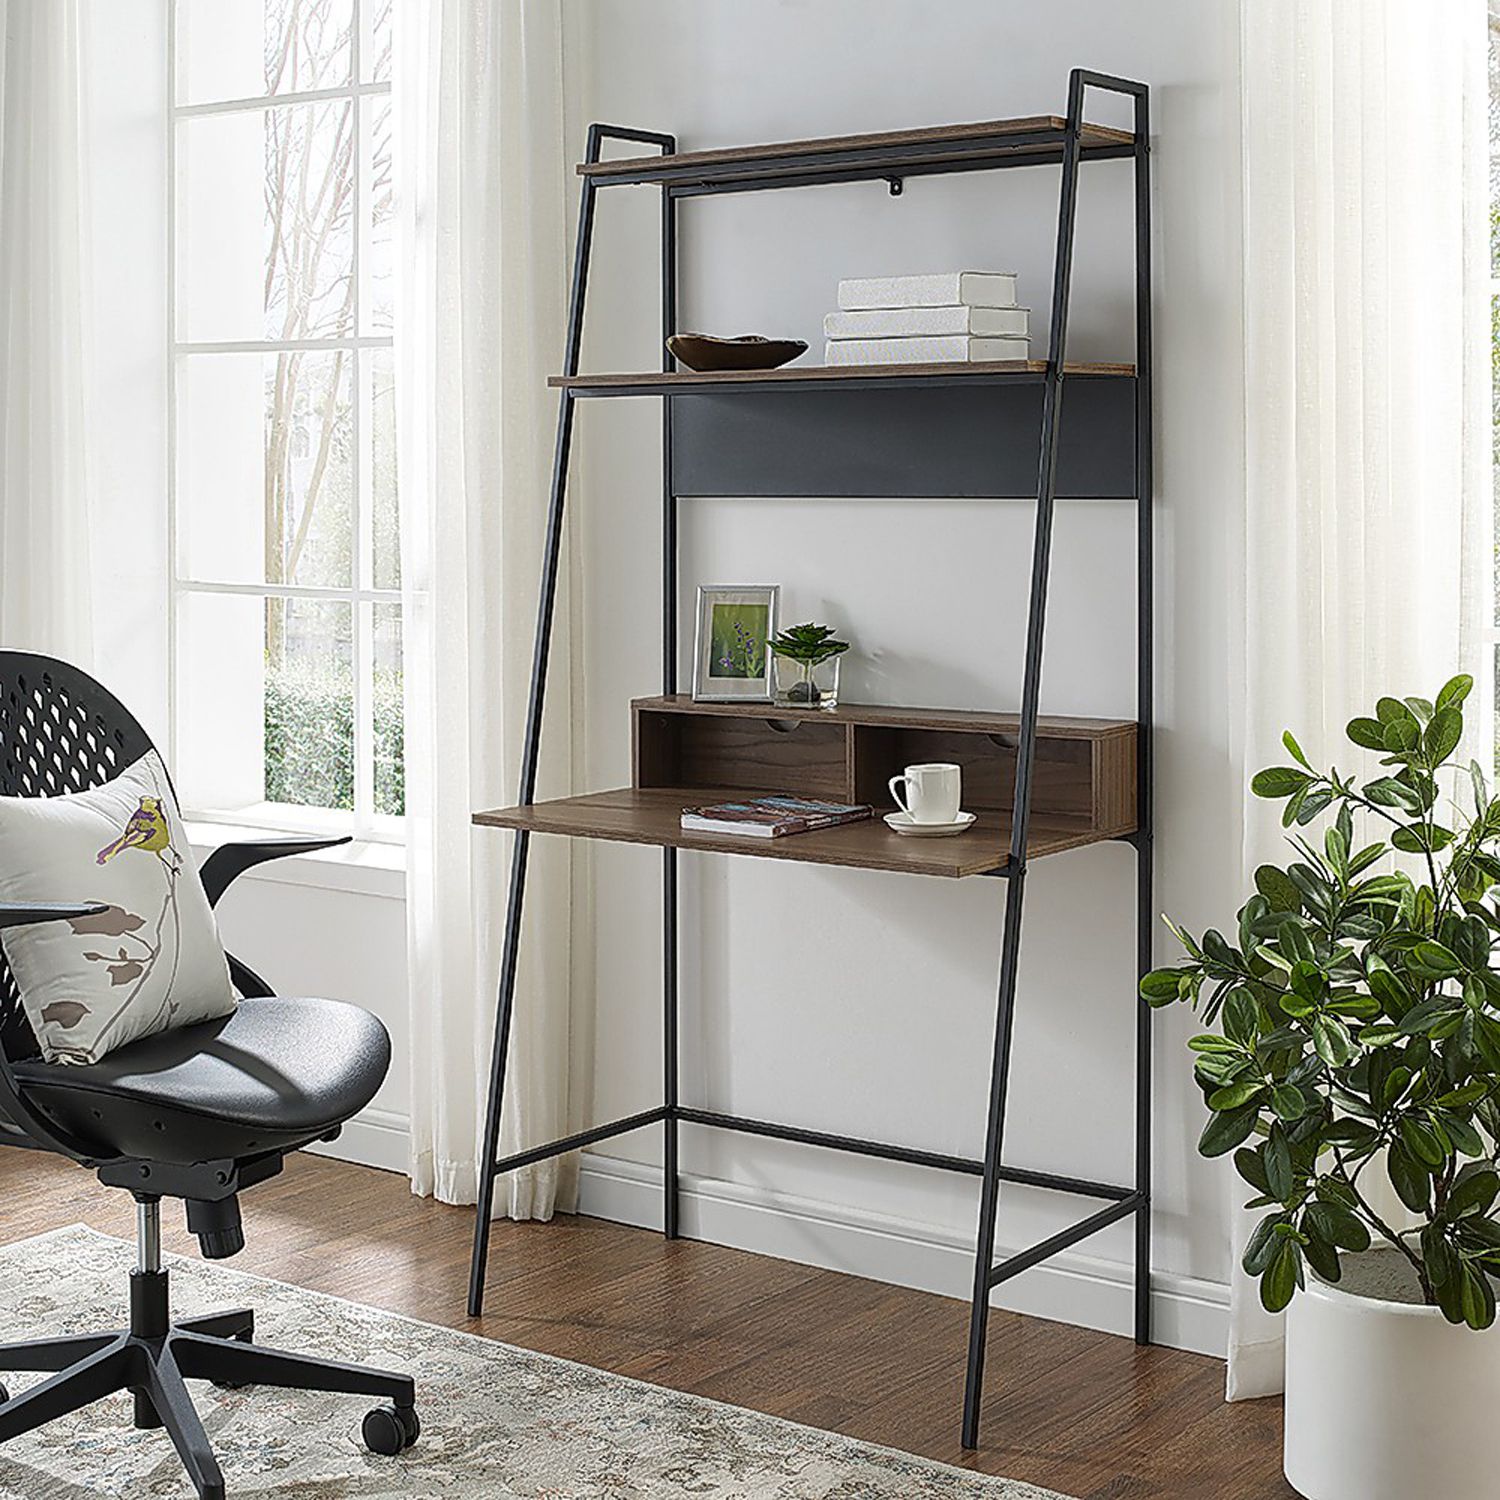 White Ladder Desks Pertaining To Most Current Industrial Modern Metal & Wood Ladder Desk – Pier1 Imports (View 2 of 15)